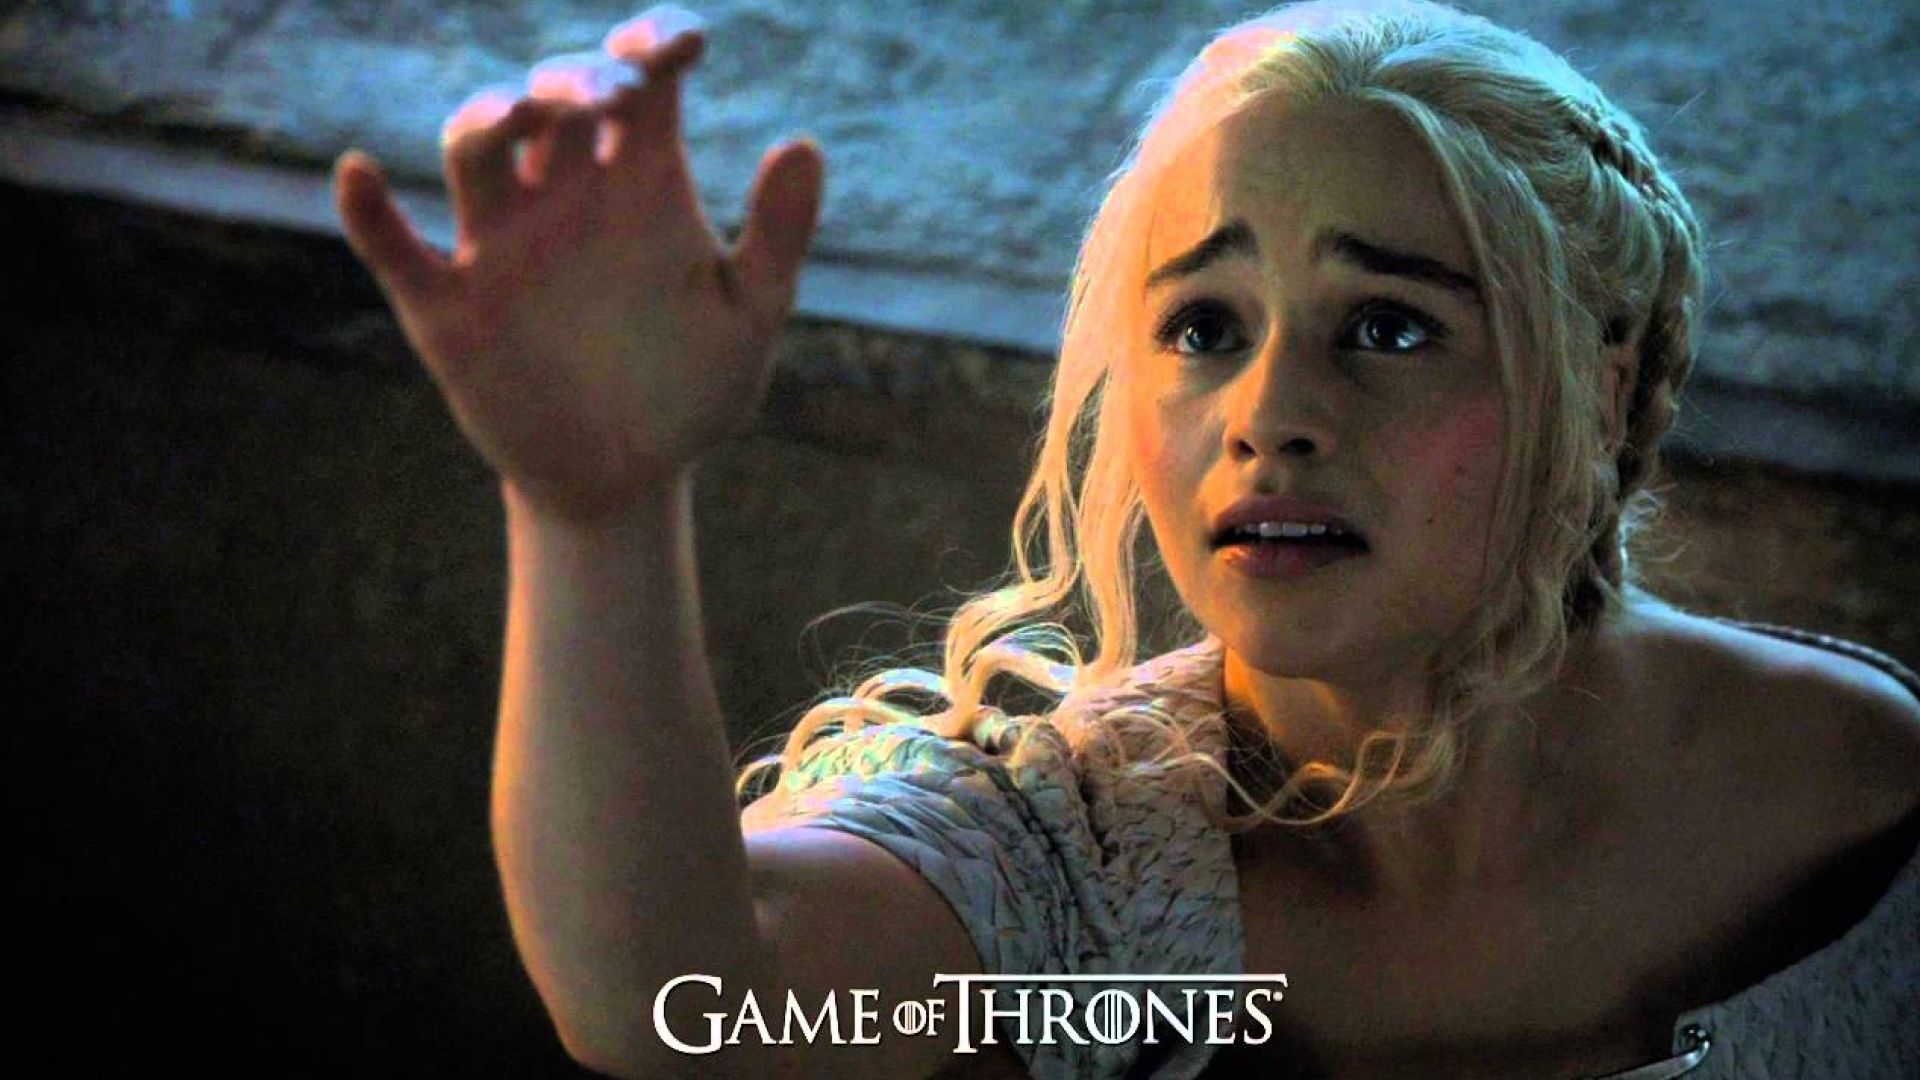 HBO Now: Game of Thrones: Mother’s Day “Daenerys And Dra